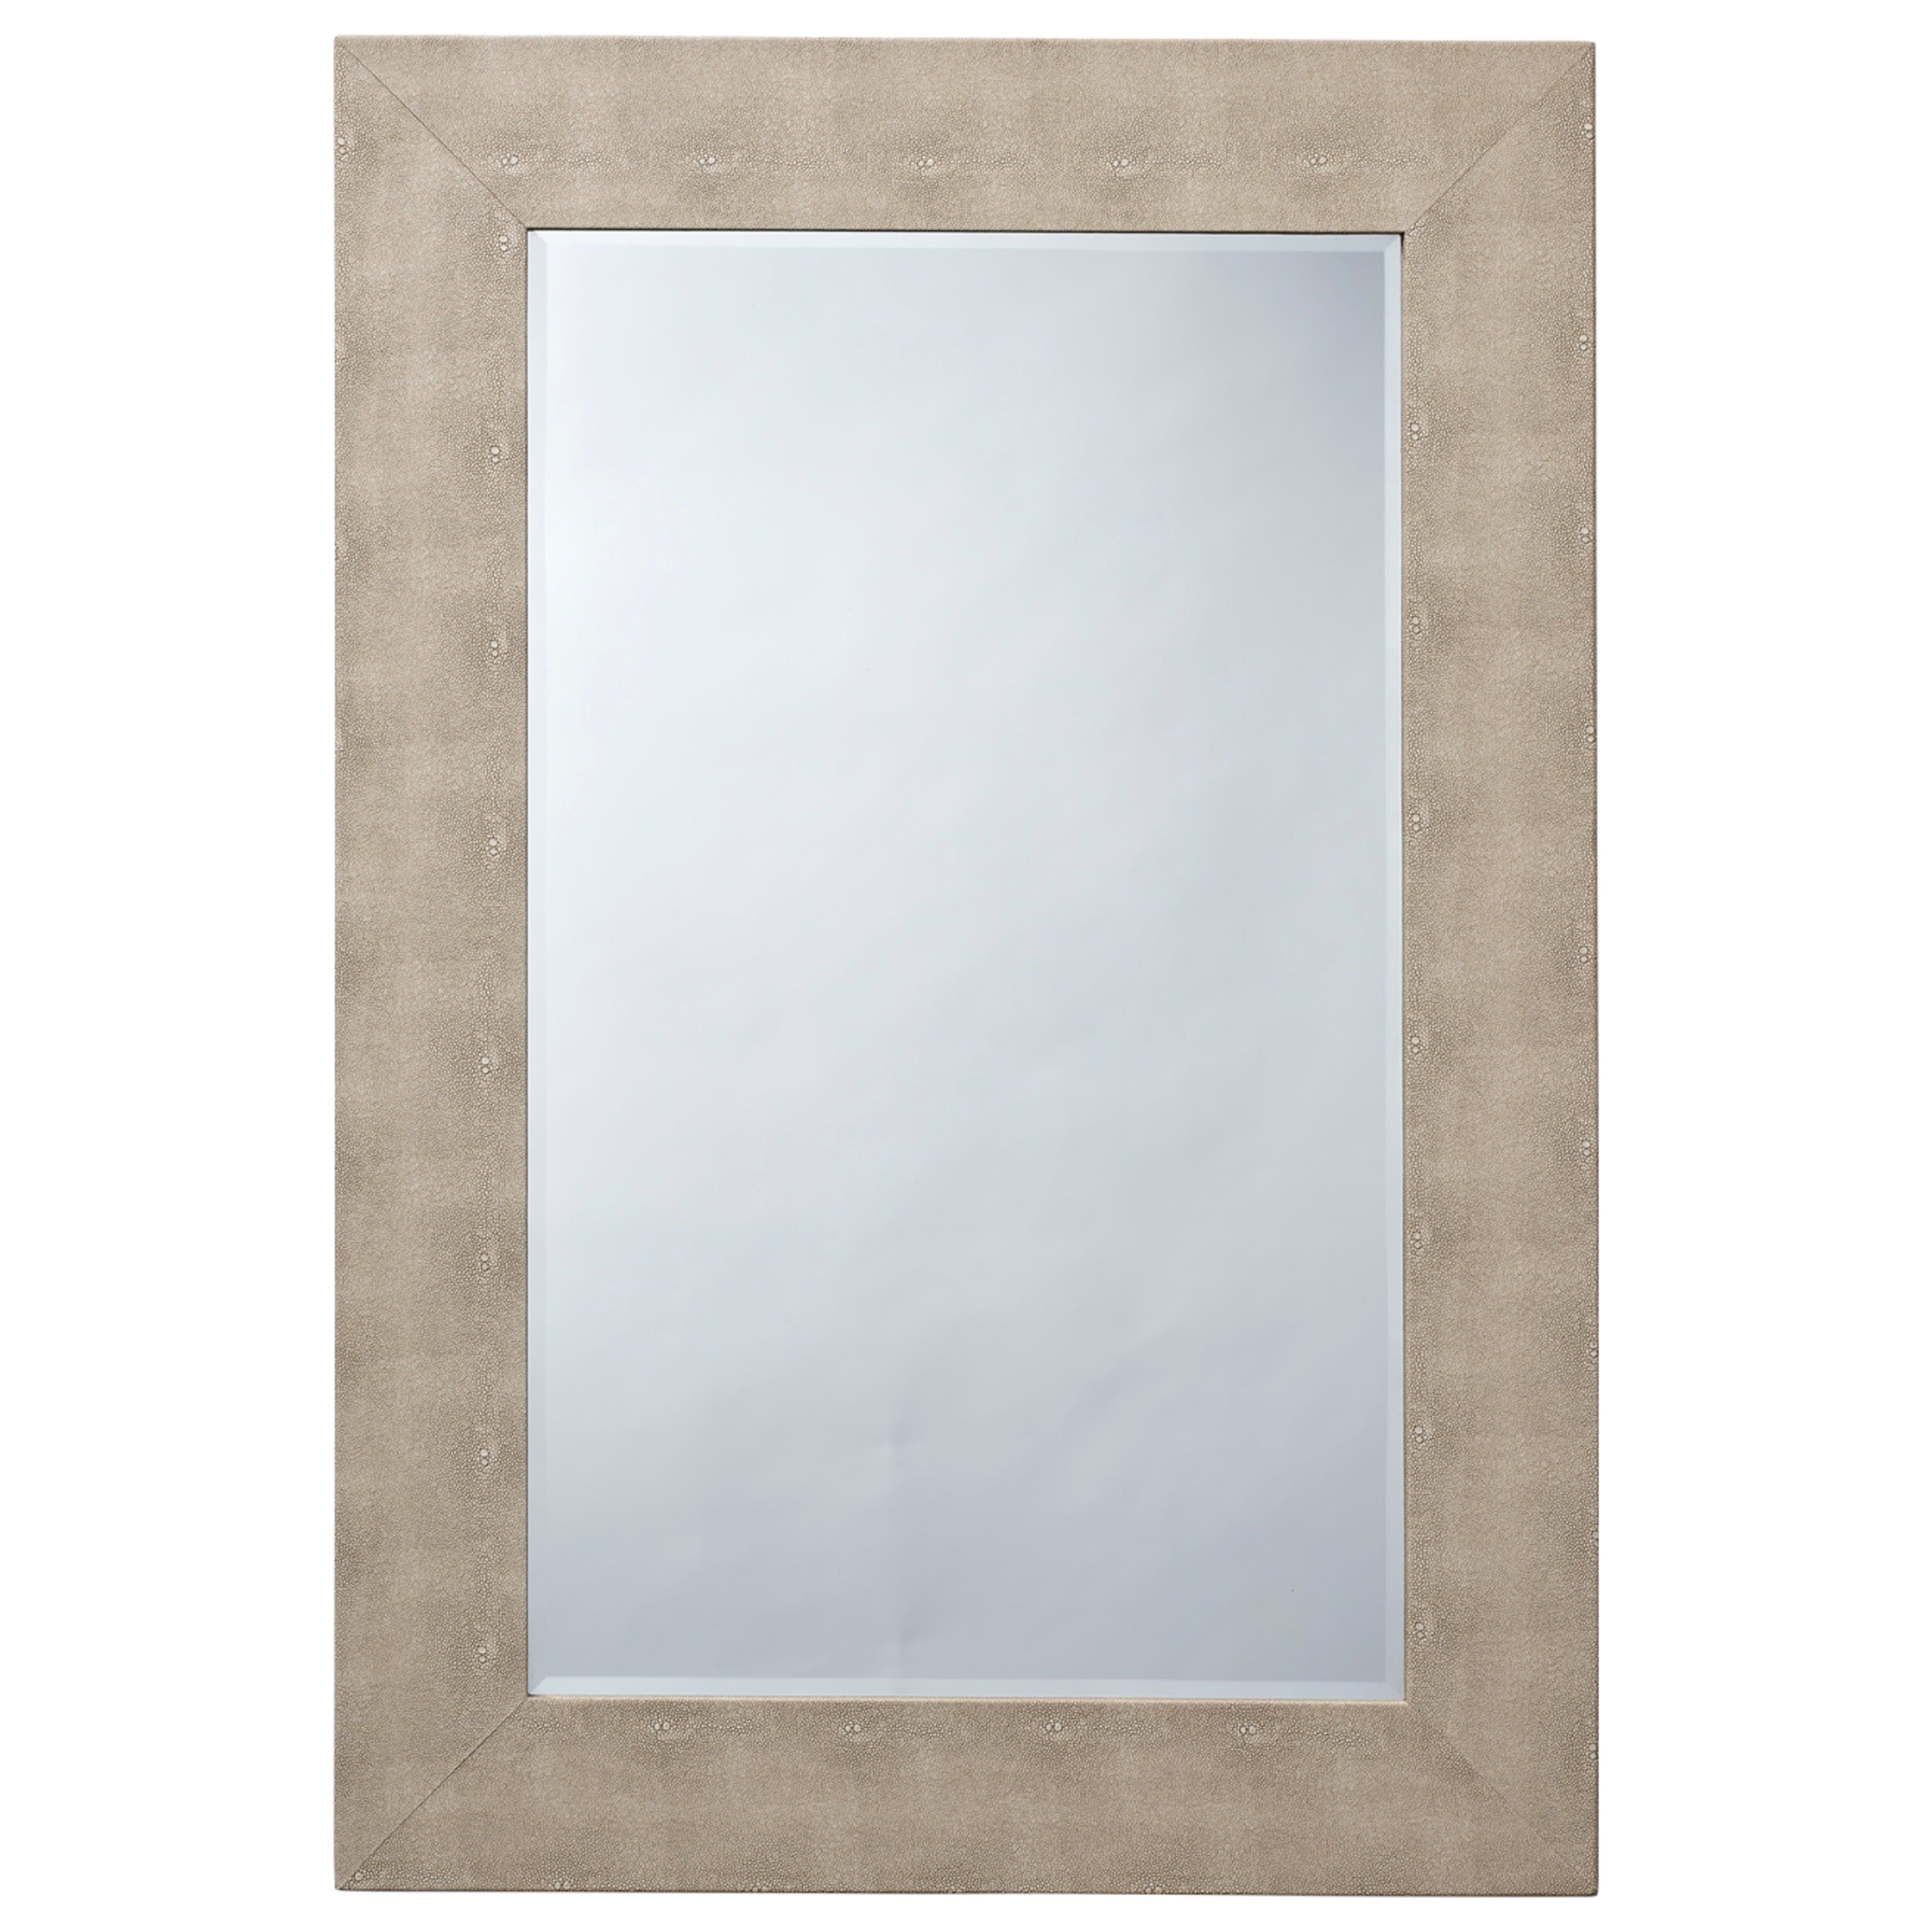 Jamie Young Company - LS6STRURECIV - Structure Rectangle Mirror - Structure - Ivory